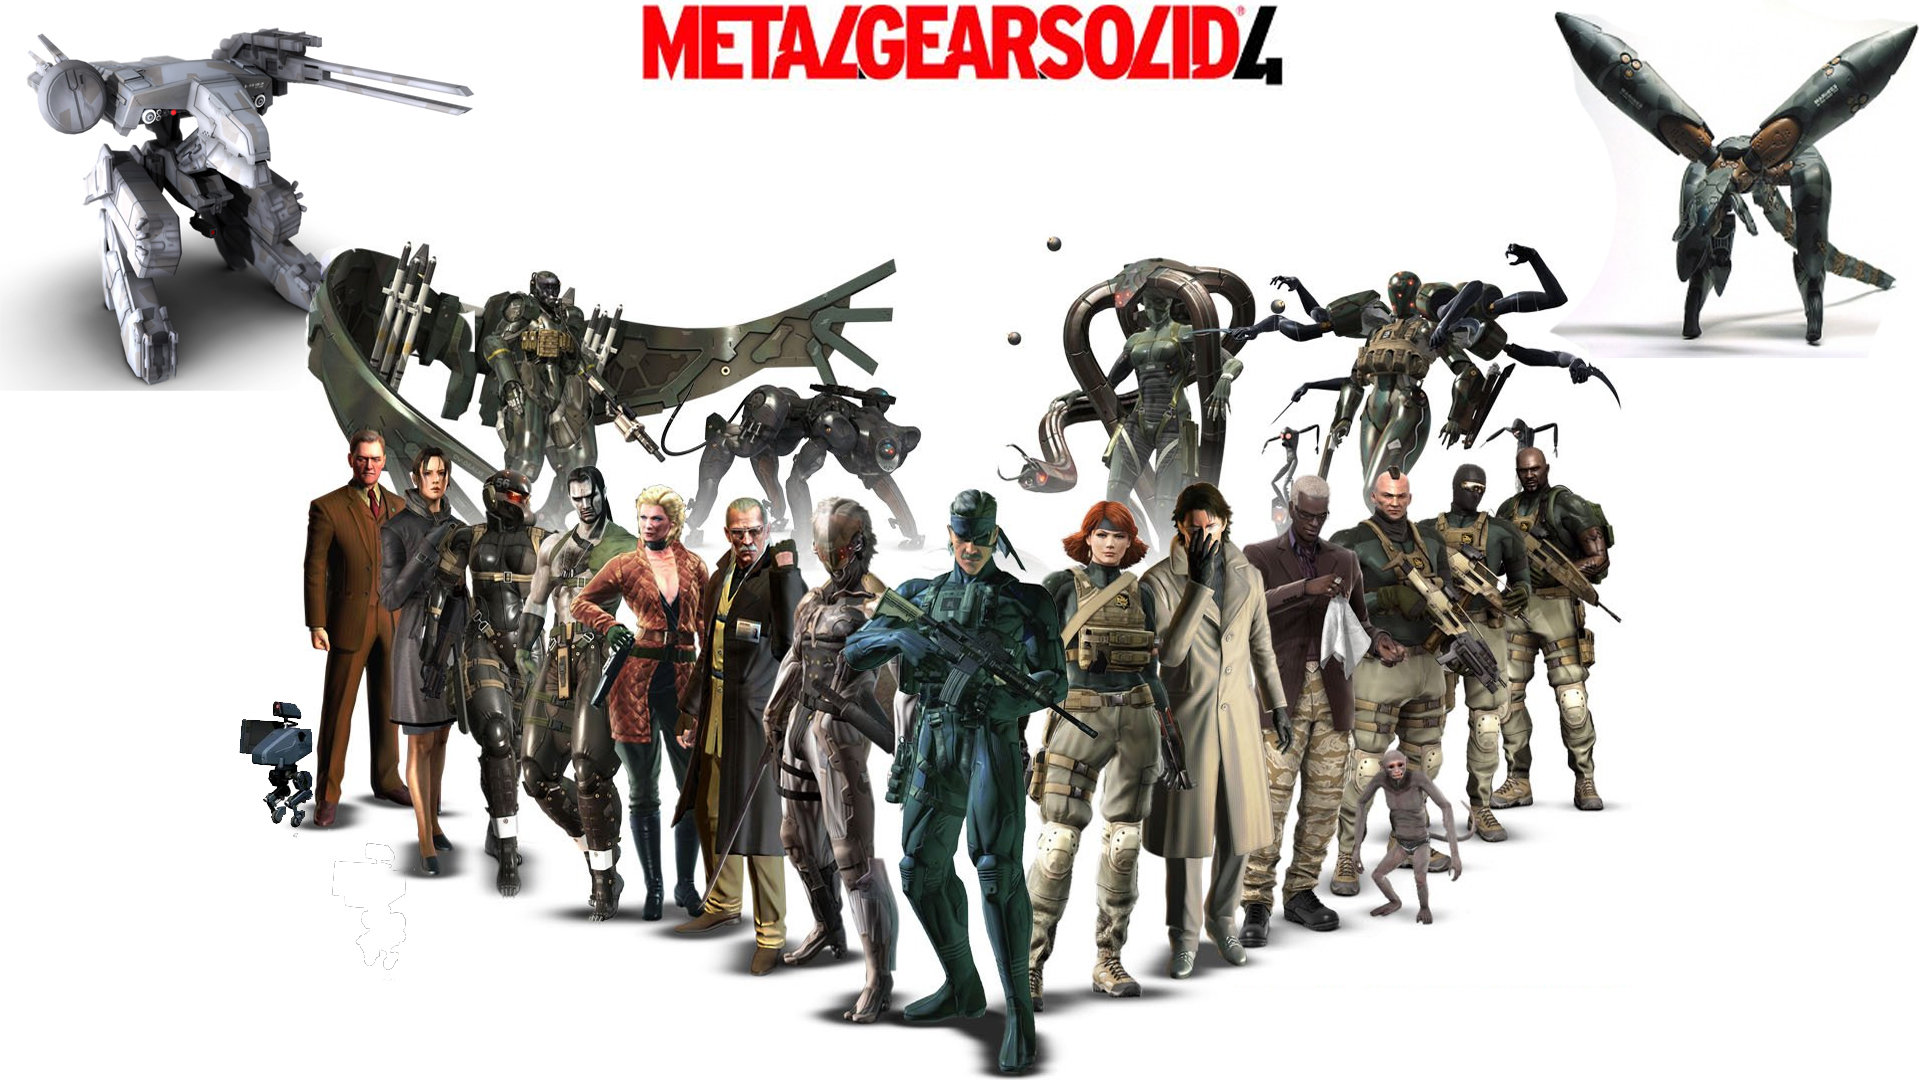 Awesome Metal Gear Solid 4: Guns Of The Patriots (MGS 4) free background ID:419870 for hd 1920x1080 computer